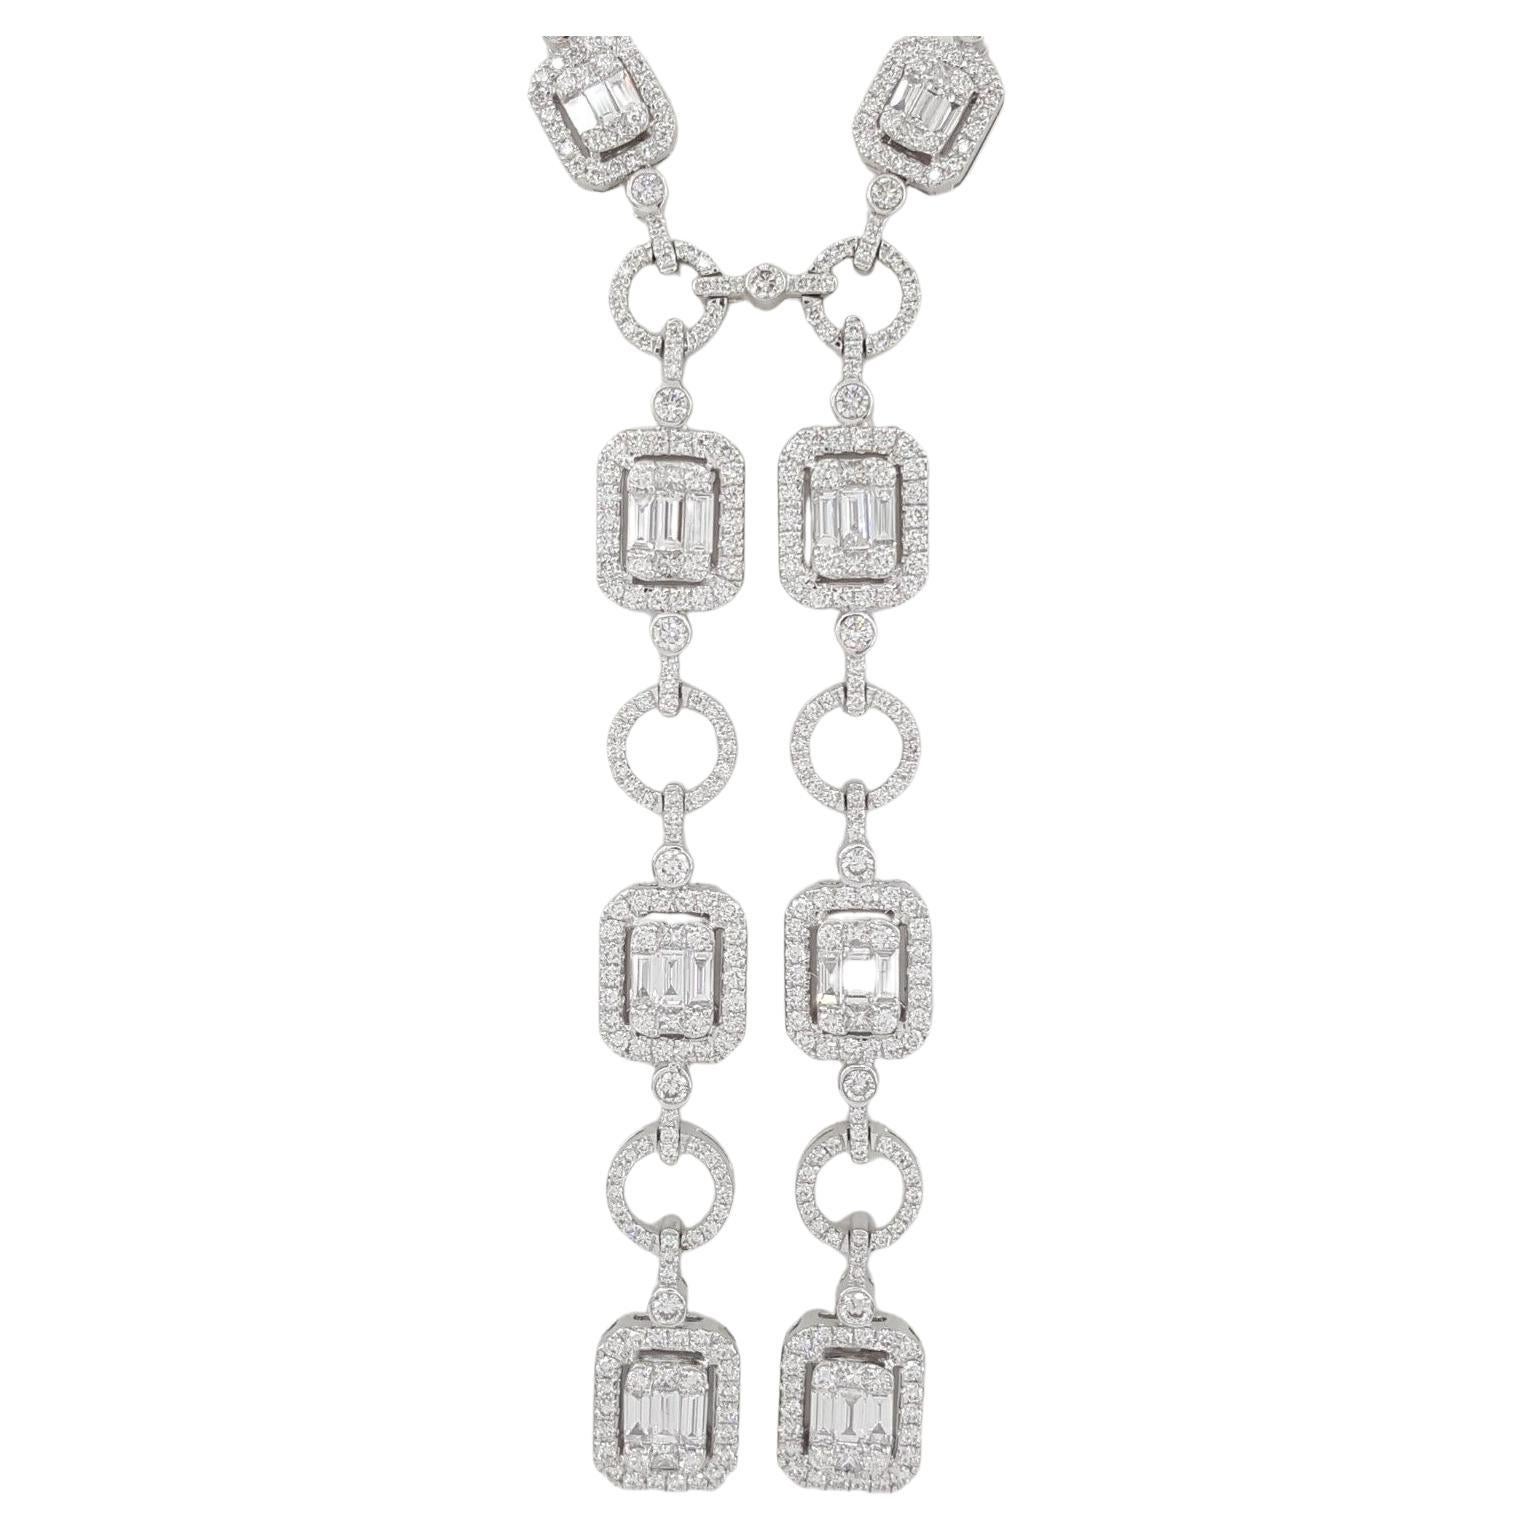 Authentic 18K White Gold Unisex 9 ct Total Weight Round Brilliant, Baguette, & Princess Cut Diamonds Halo Drop/Dangle Lariat Necklace.

The necklace weighs 48.5 grams, 16.5